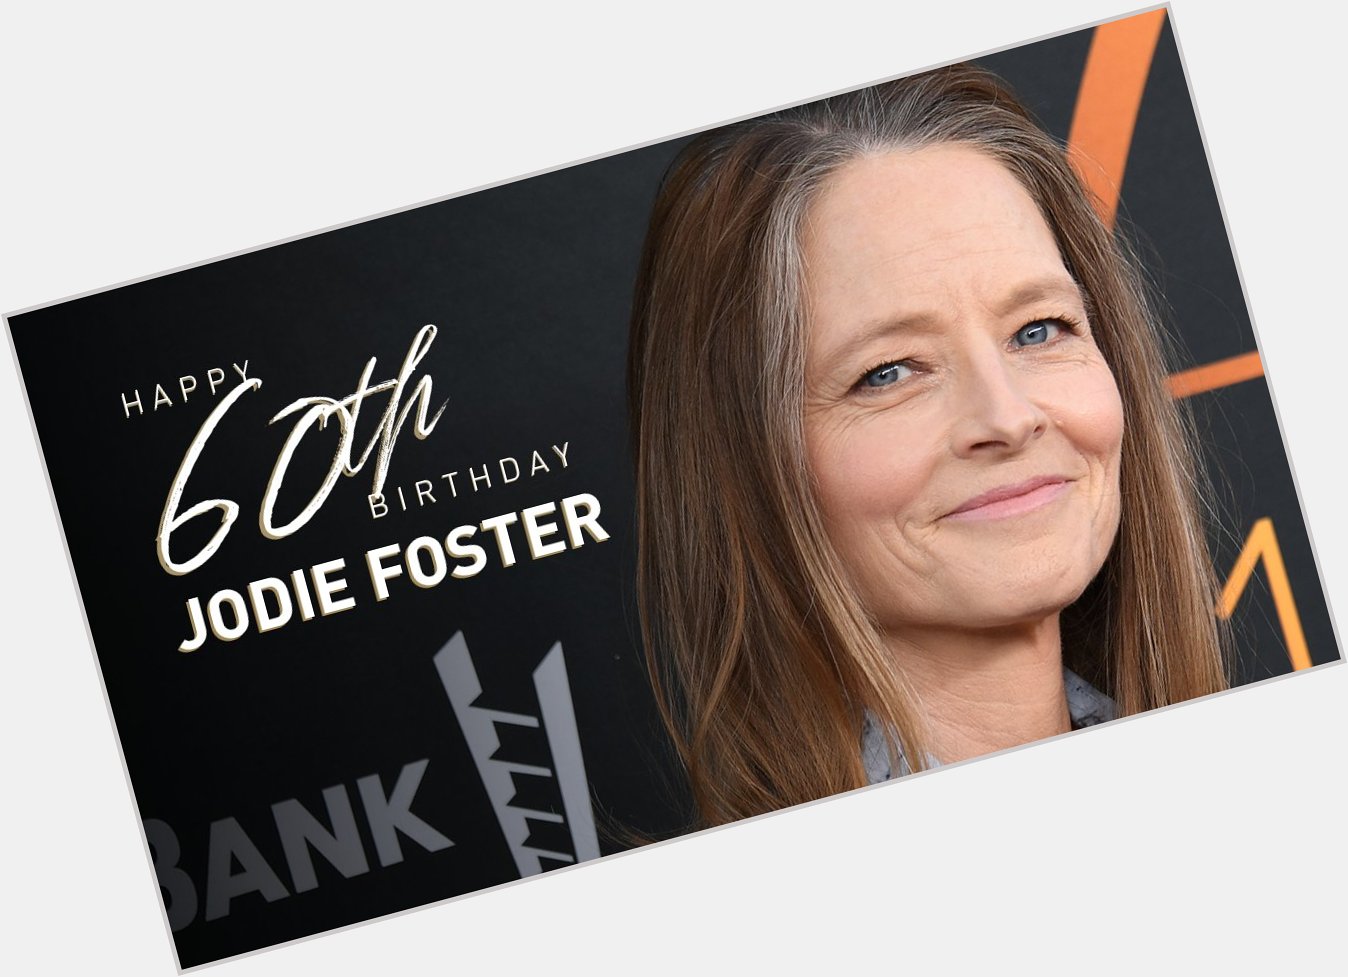 Happy 60th birthday to the incredible Actress Jodie Foster!

Read her bio here:  